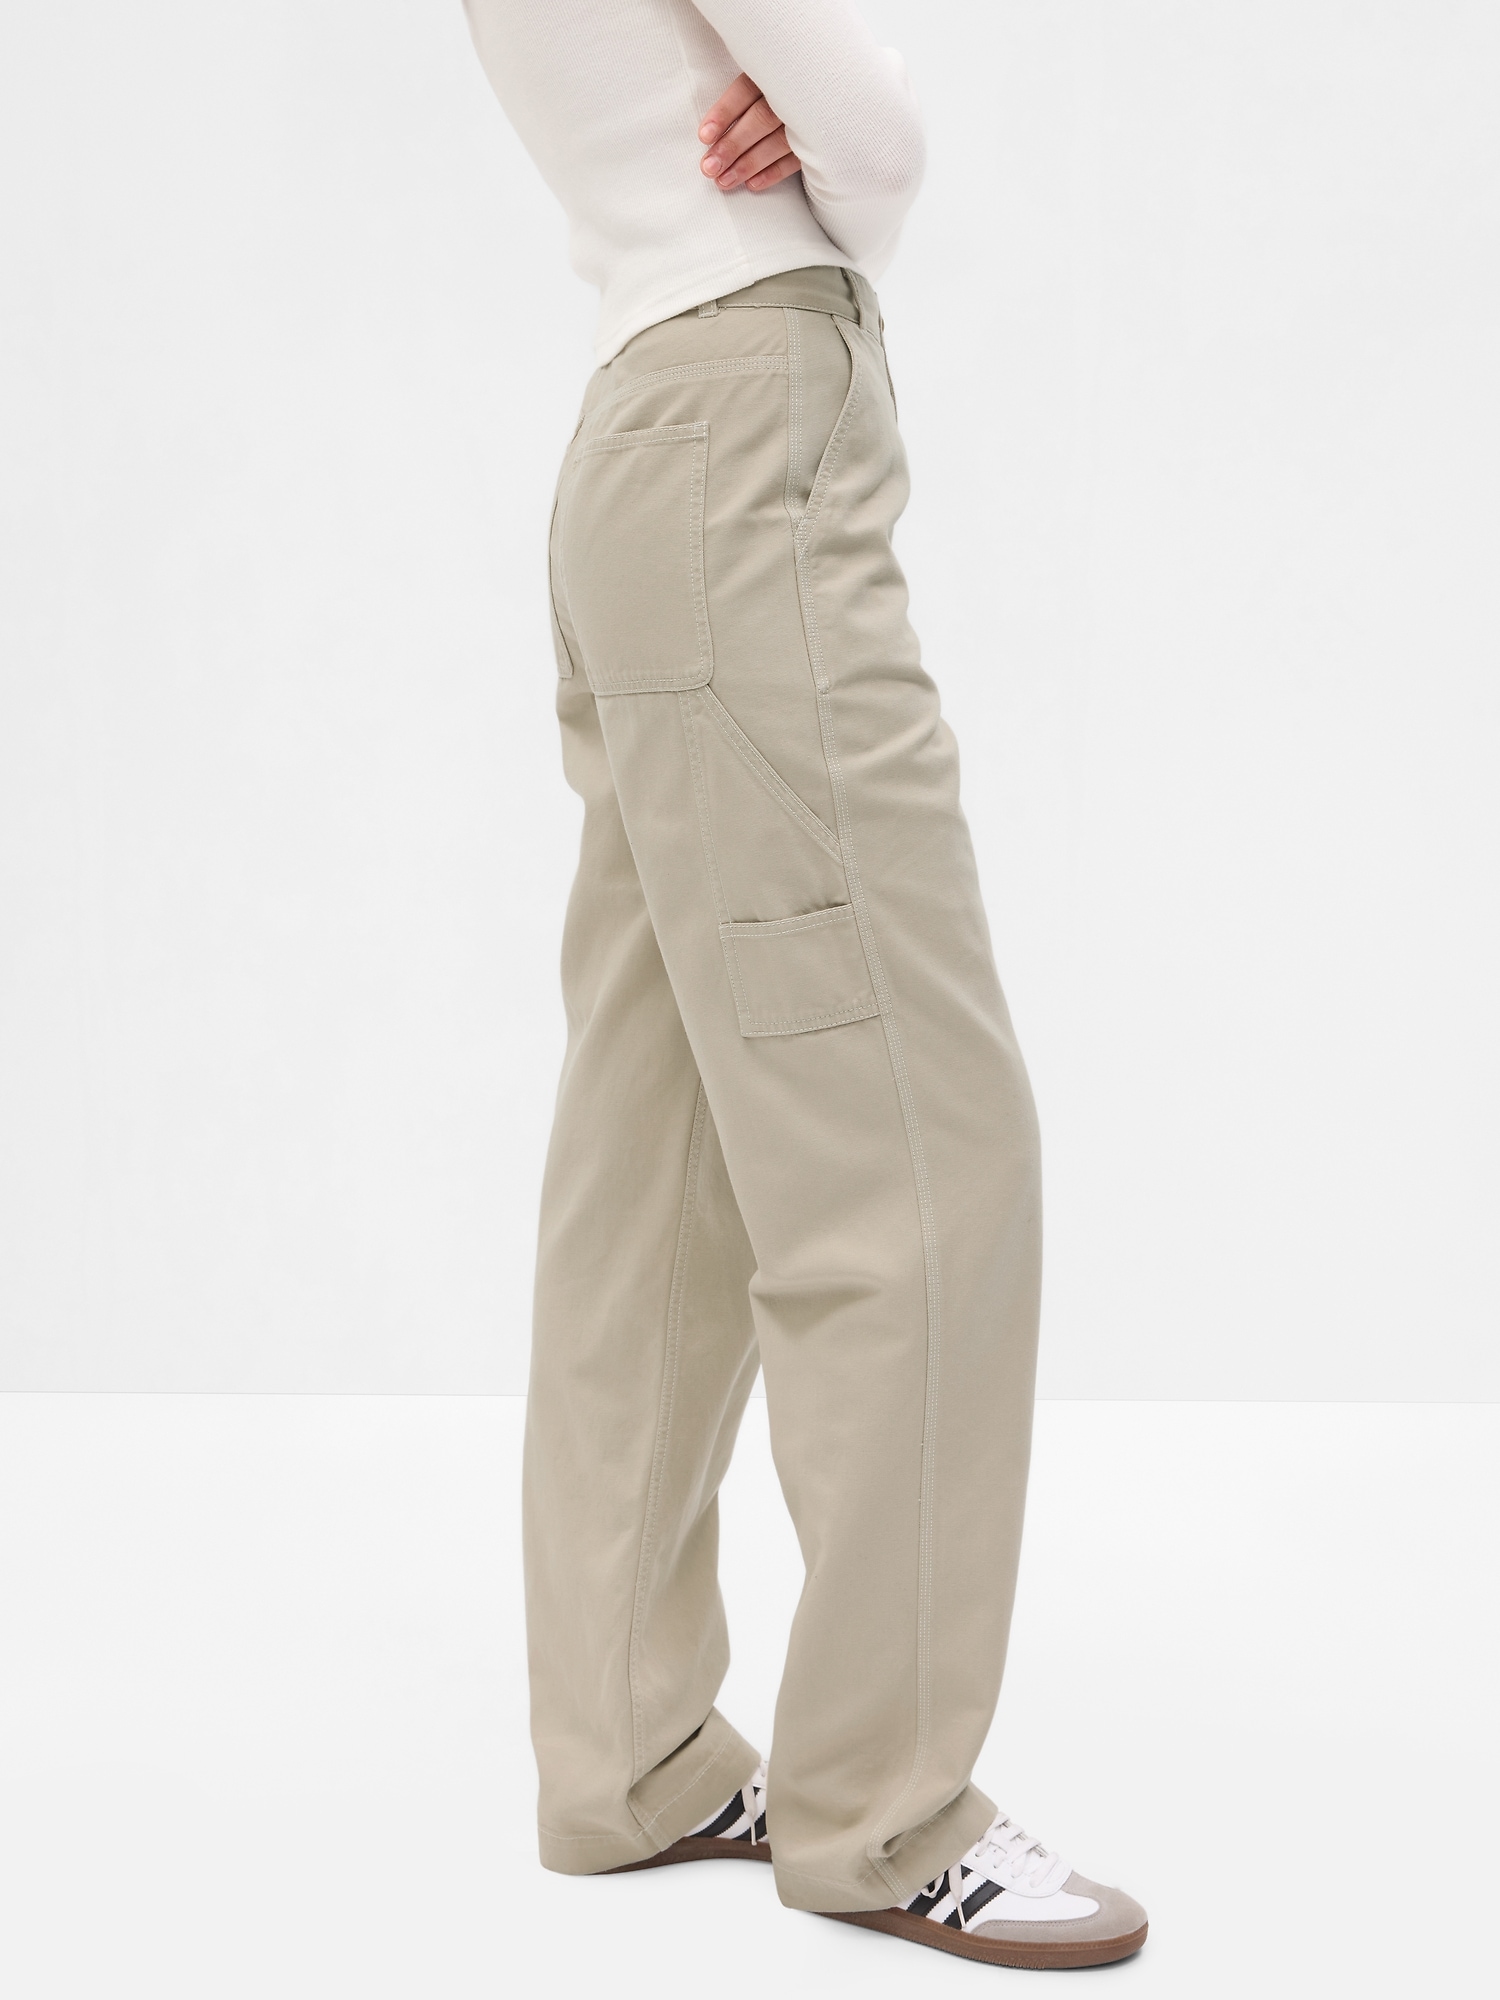 Buy Gap Utility Trousers from the Gap online shop